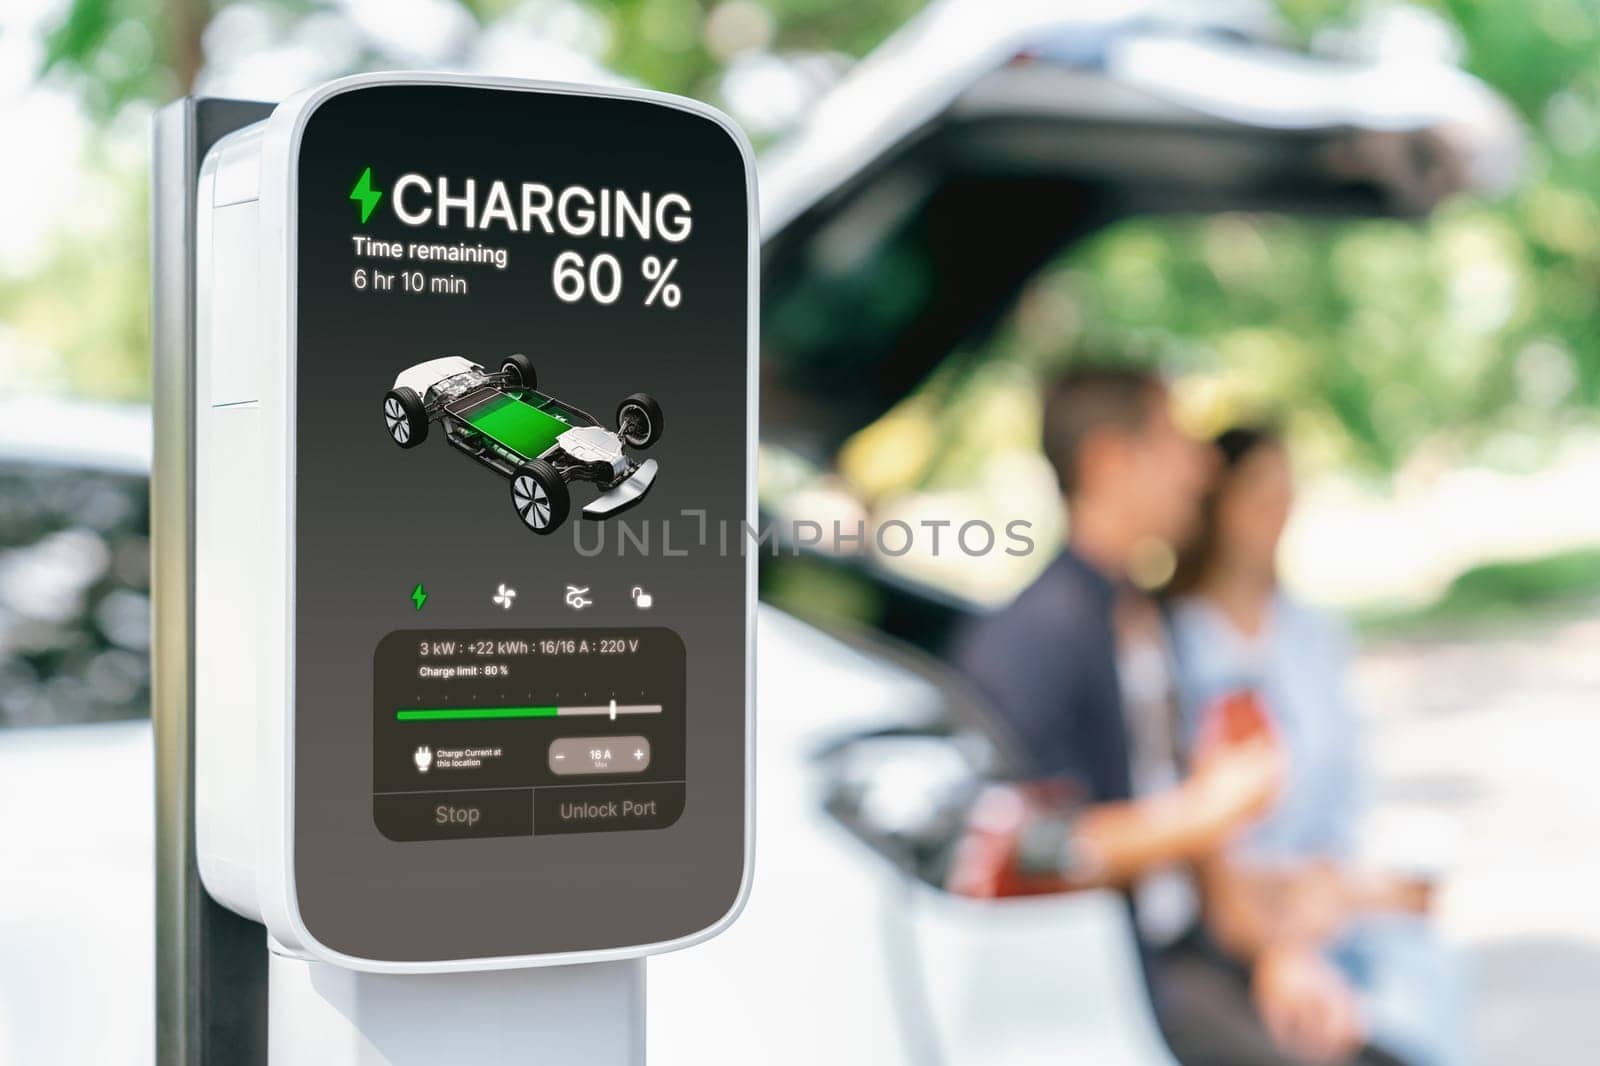 Focused EV charging station monitor display battery status for. Exalt by biancoblue